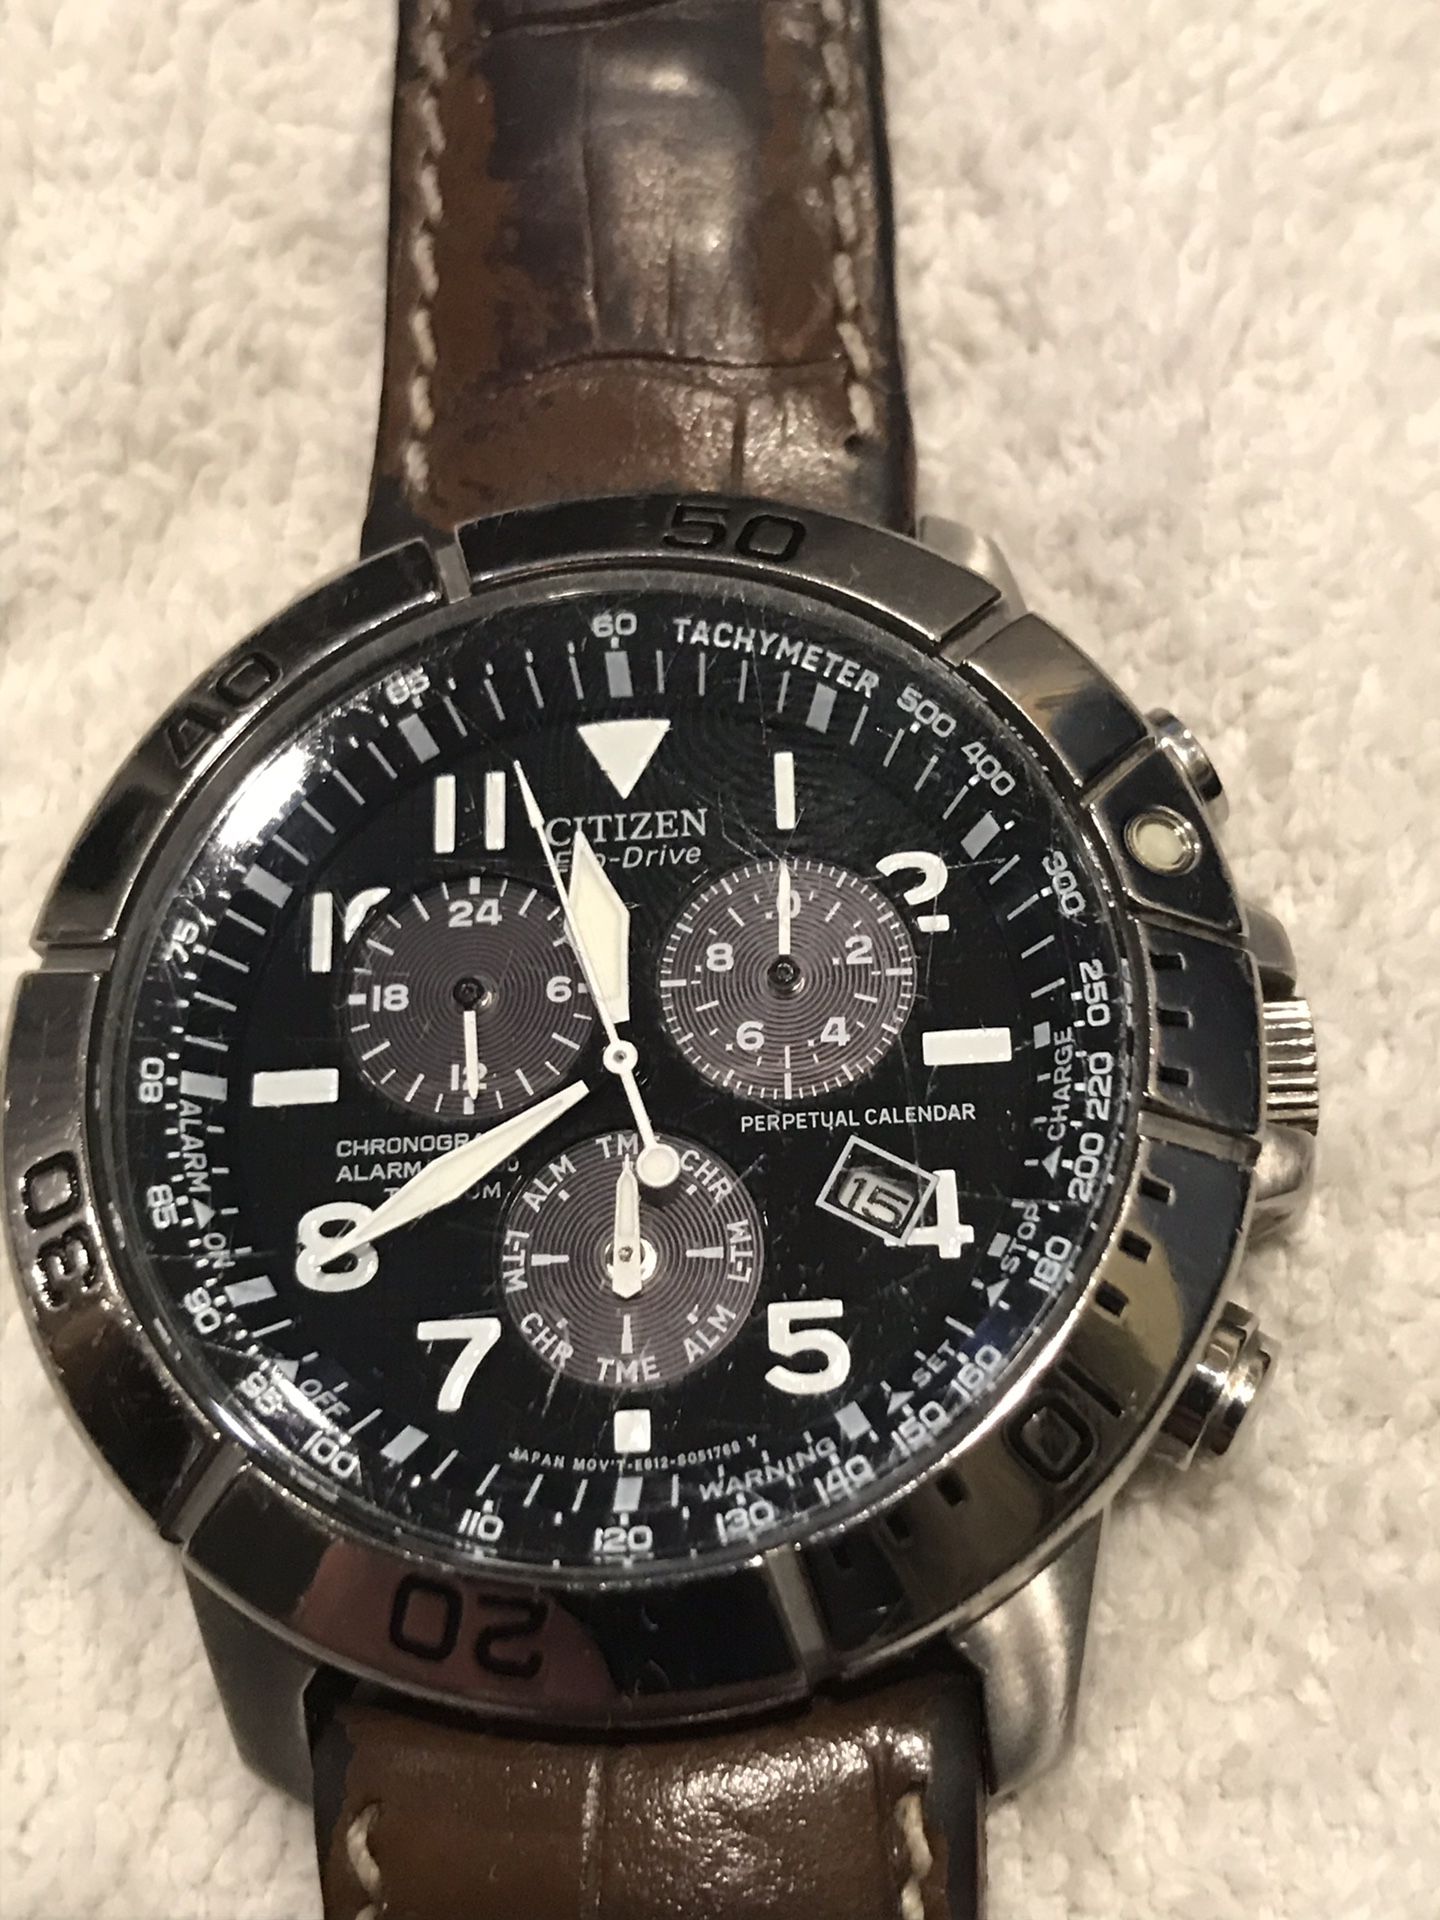 CITIZEN ECO-DRIVE MEN'S CHRONOGRAPH WRISTWATCH E820-S061636 LEATHER BAND  USED. Condition is Pre-owned. citizen . 20 bar gn-4-s e820-s061636 watch  for Sale in Brookfield, CT - OfferUp